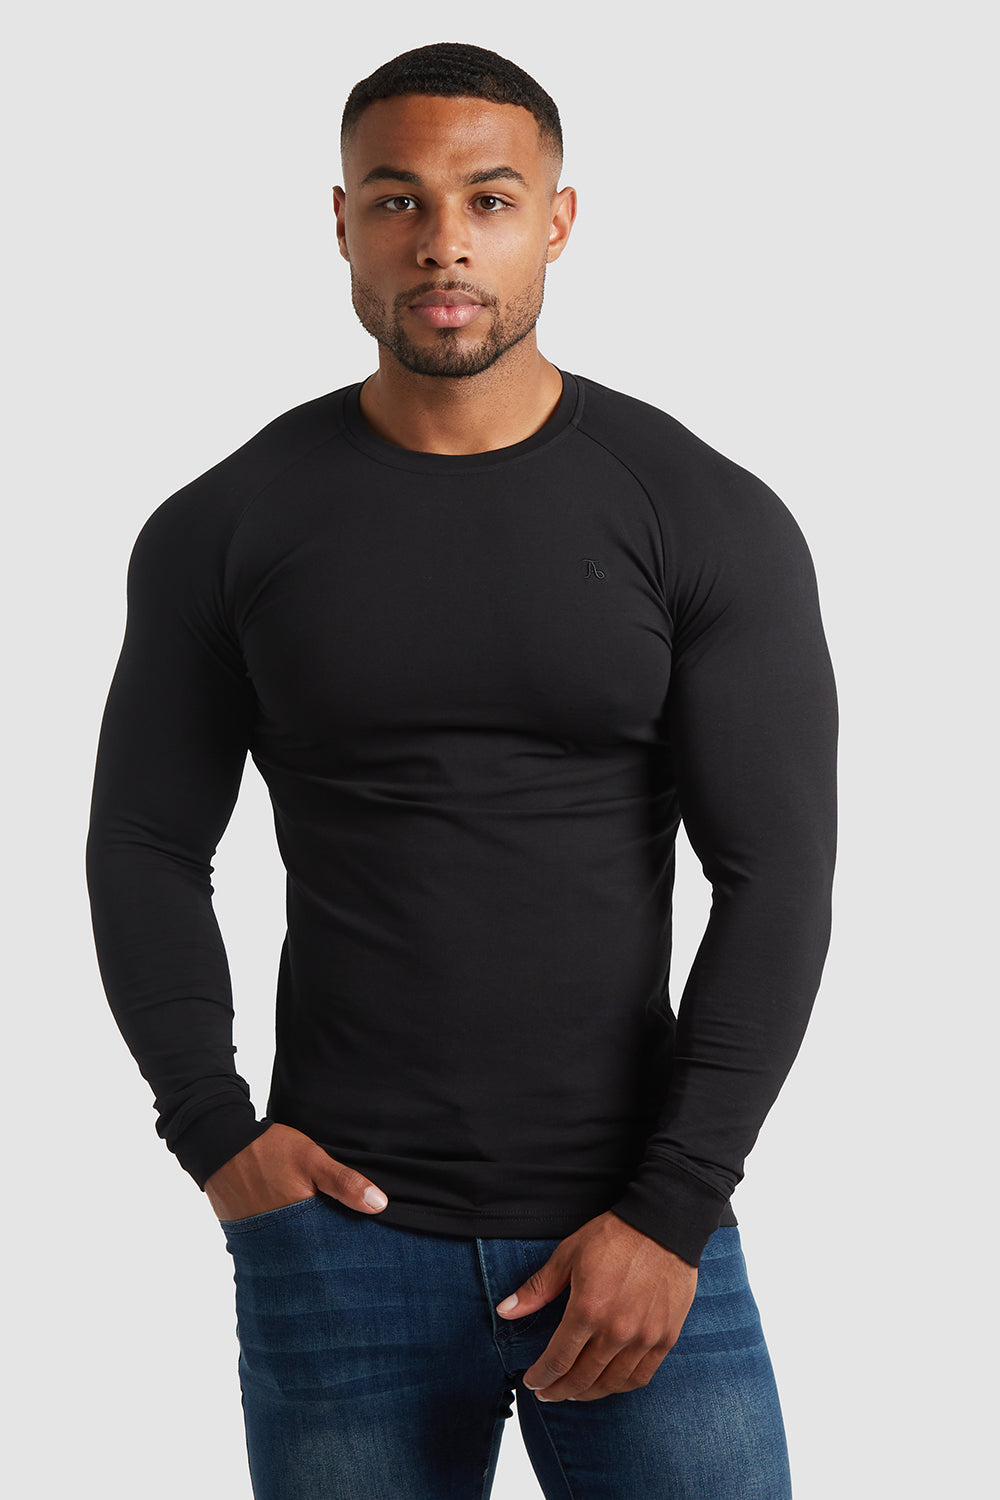 Athletic Fit T-Shirts - Tailored Athlete - TAILORED ATHLETE - USA